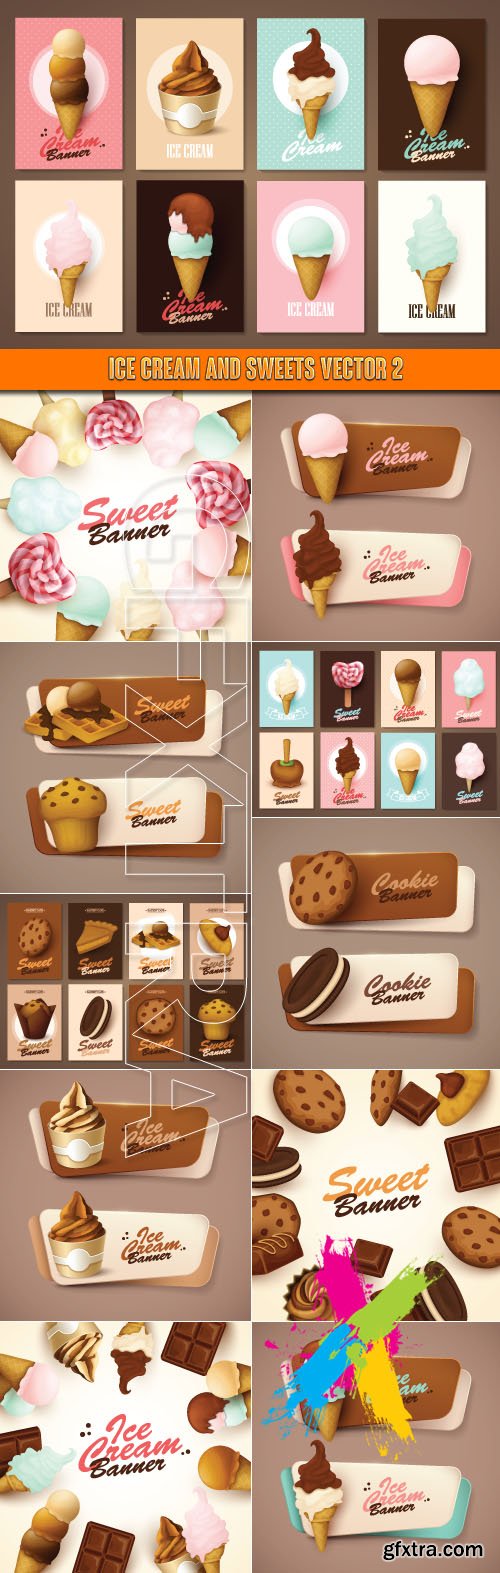 Ice cream and sweets vector 2